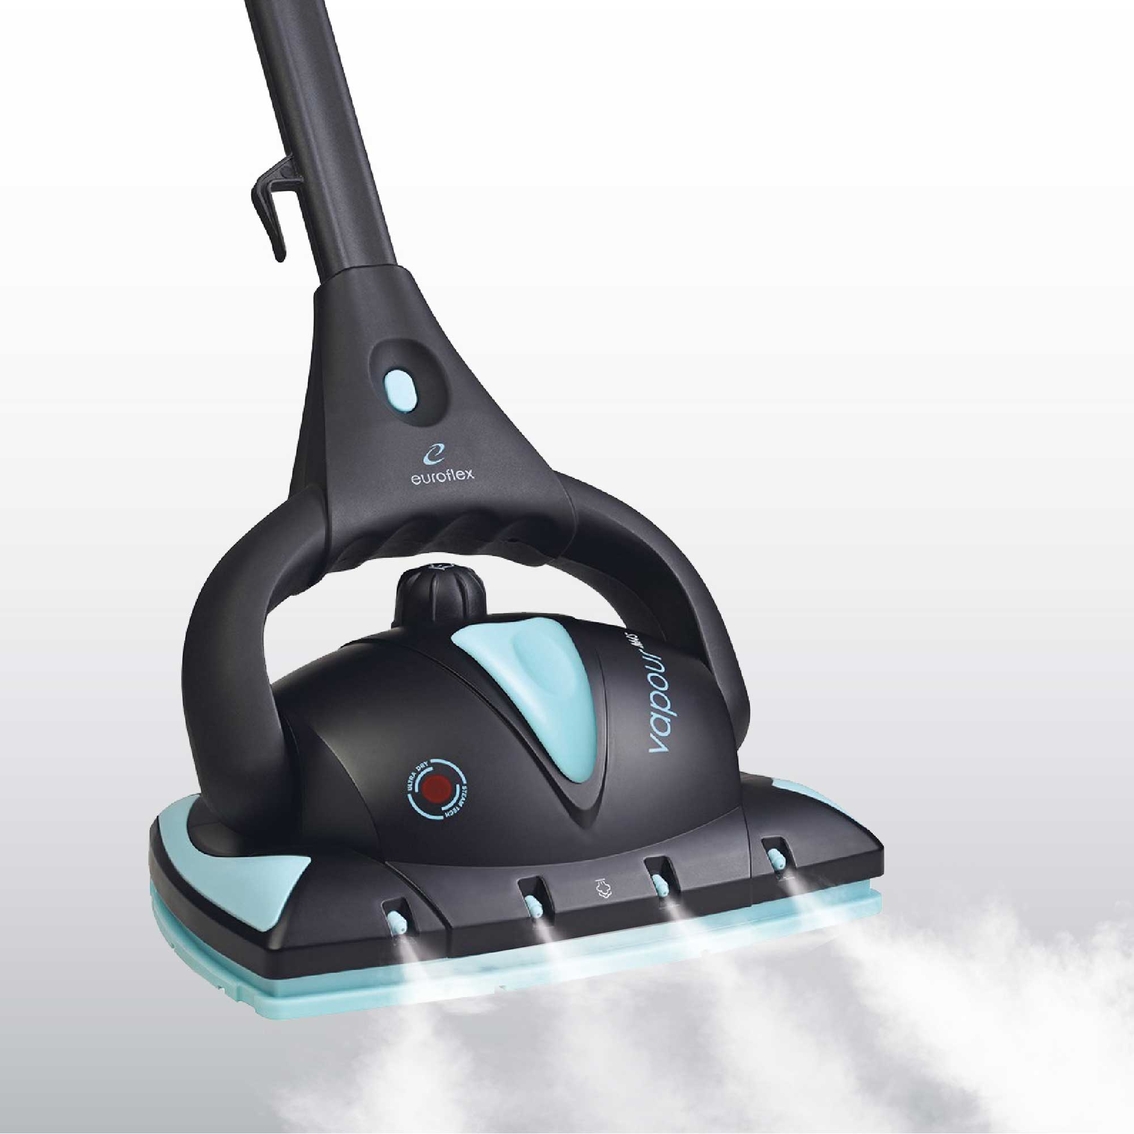 Euroflex Vapour M4S Upright Floor and Surface Steam Cleaner - Image 2 of 6